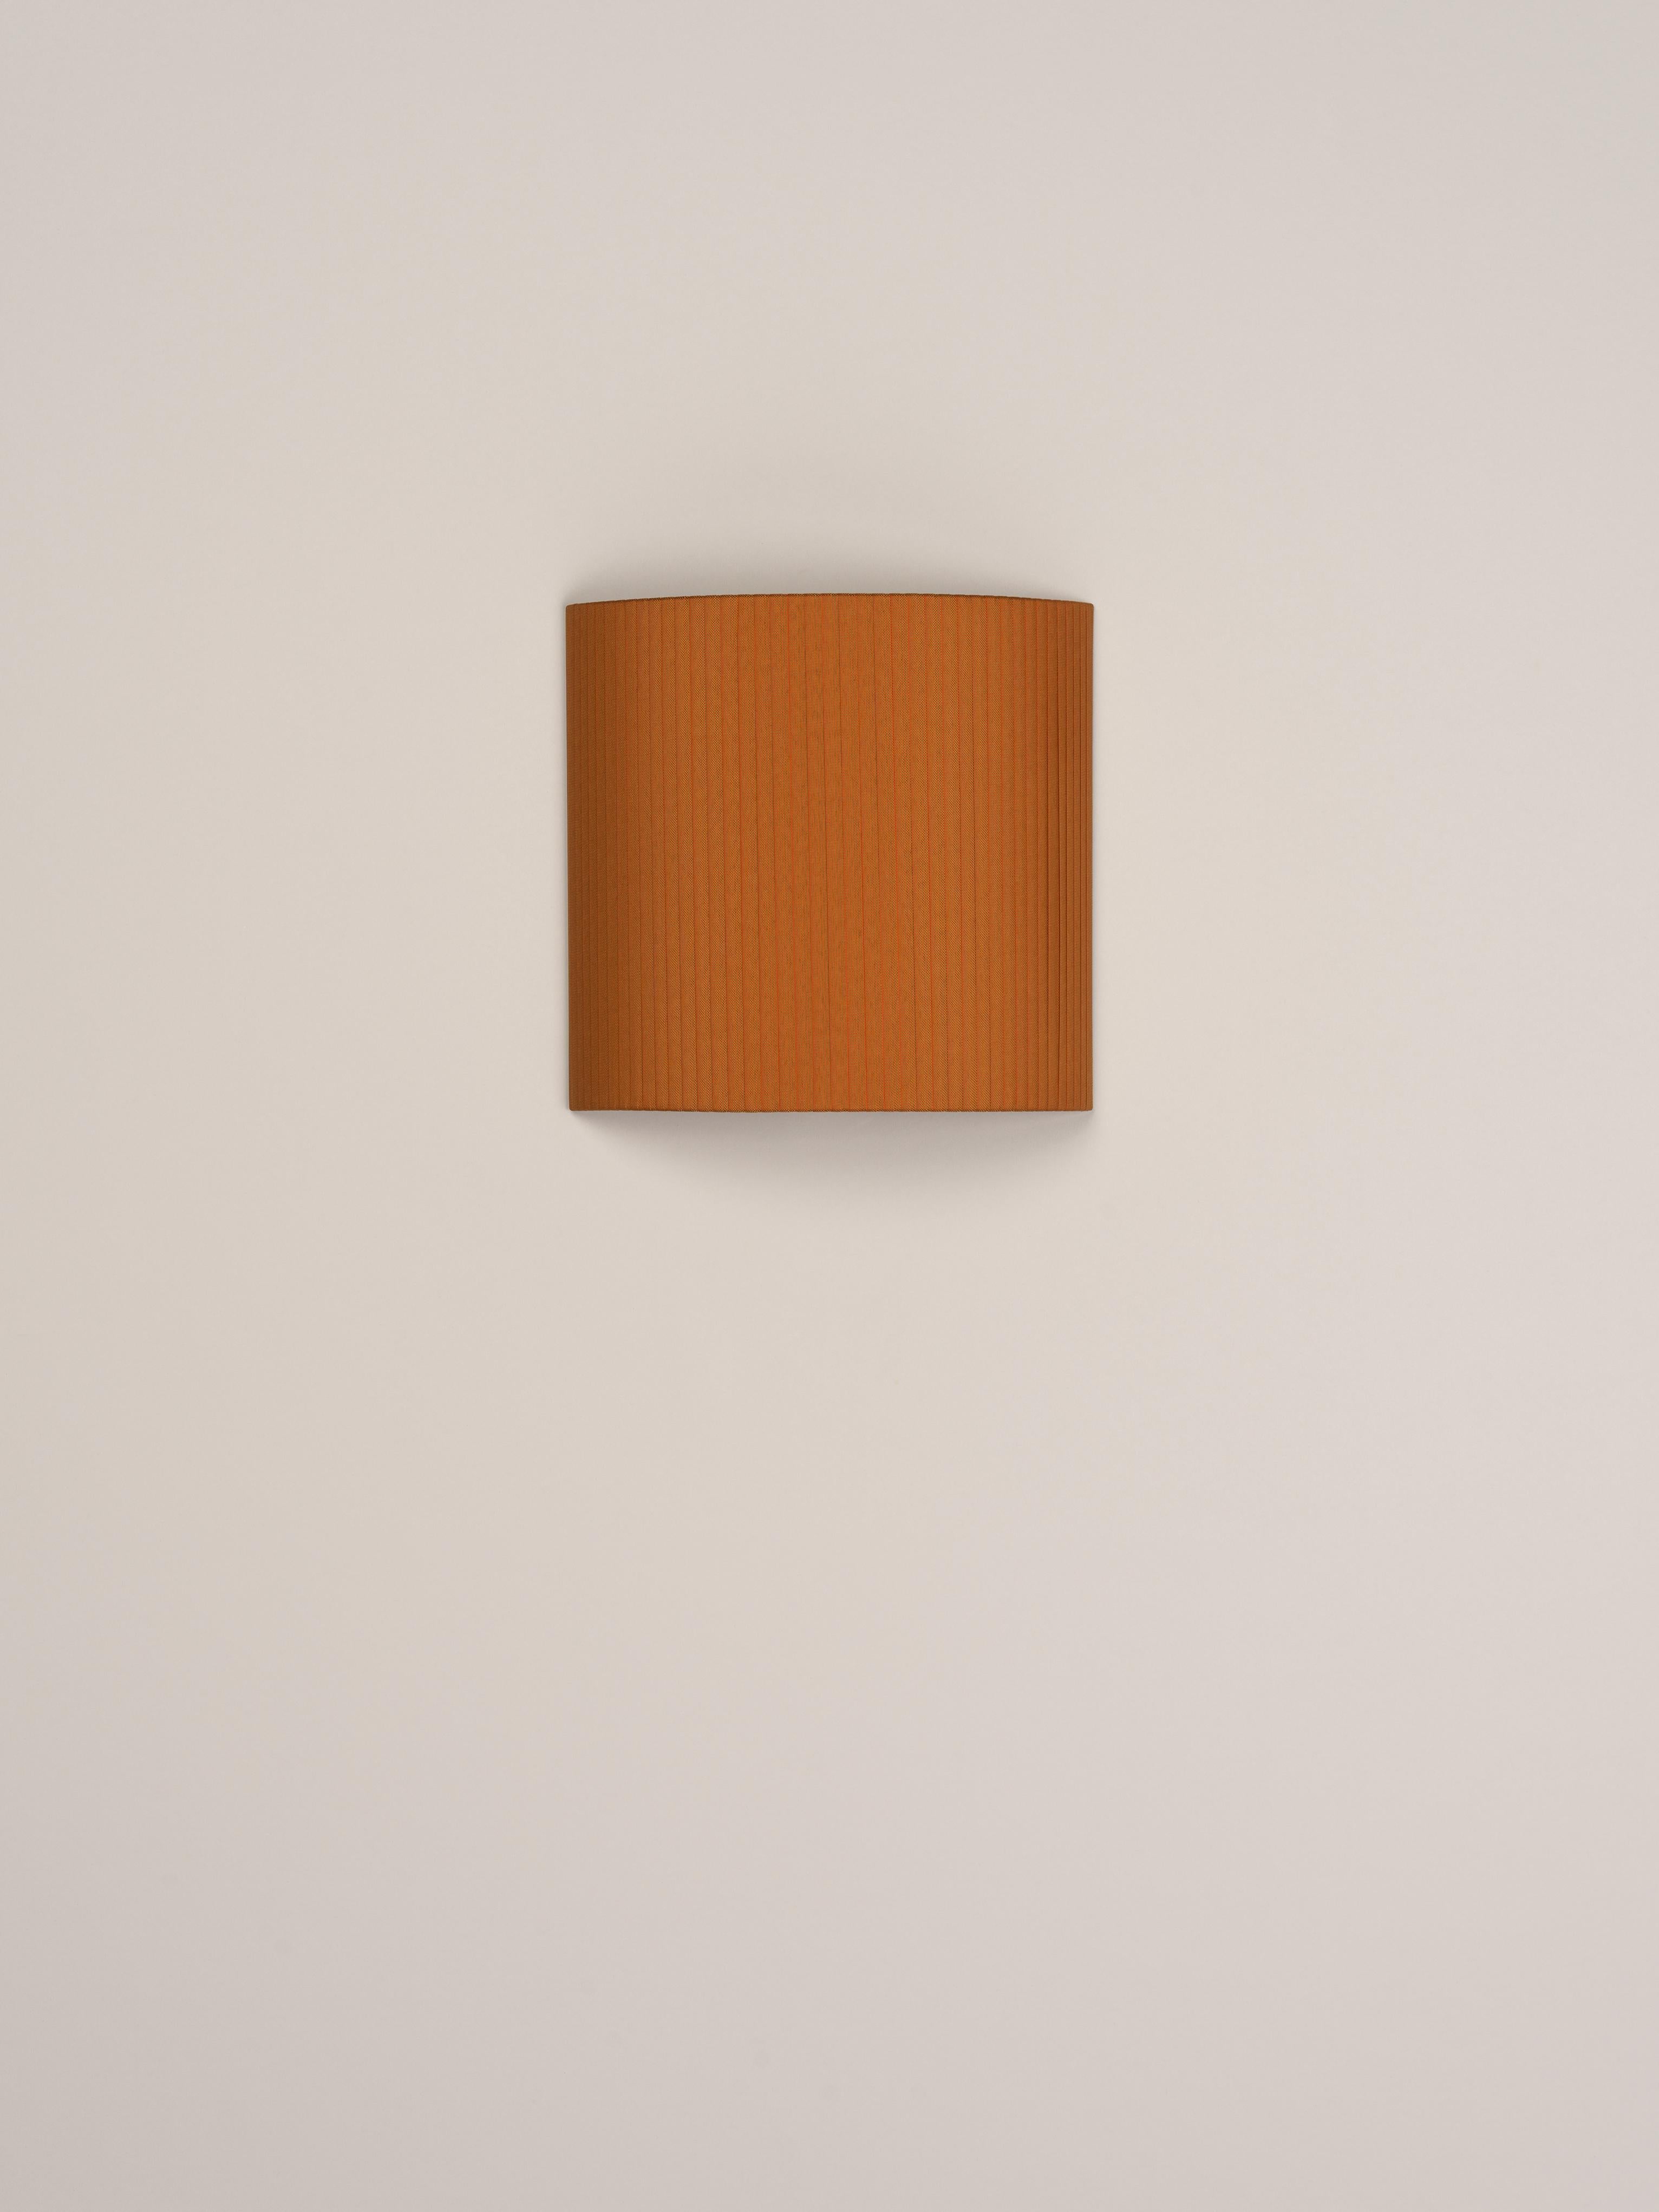 Mustard comodín cuadrado wall lamp by Santa & Cole
Dimensions: D 31 x W 13 x H 30 cm
Materials: Metal, ribbon.

This minimalist wall lamp humanises neutral spaces with its colourful and functional sobriety. The shade is fondly hand-ribboned,